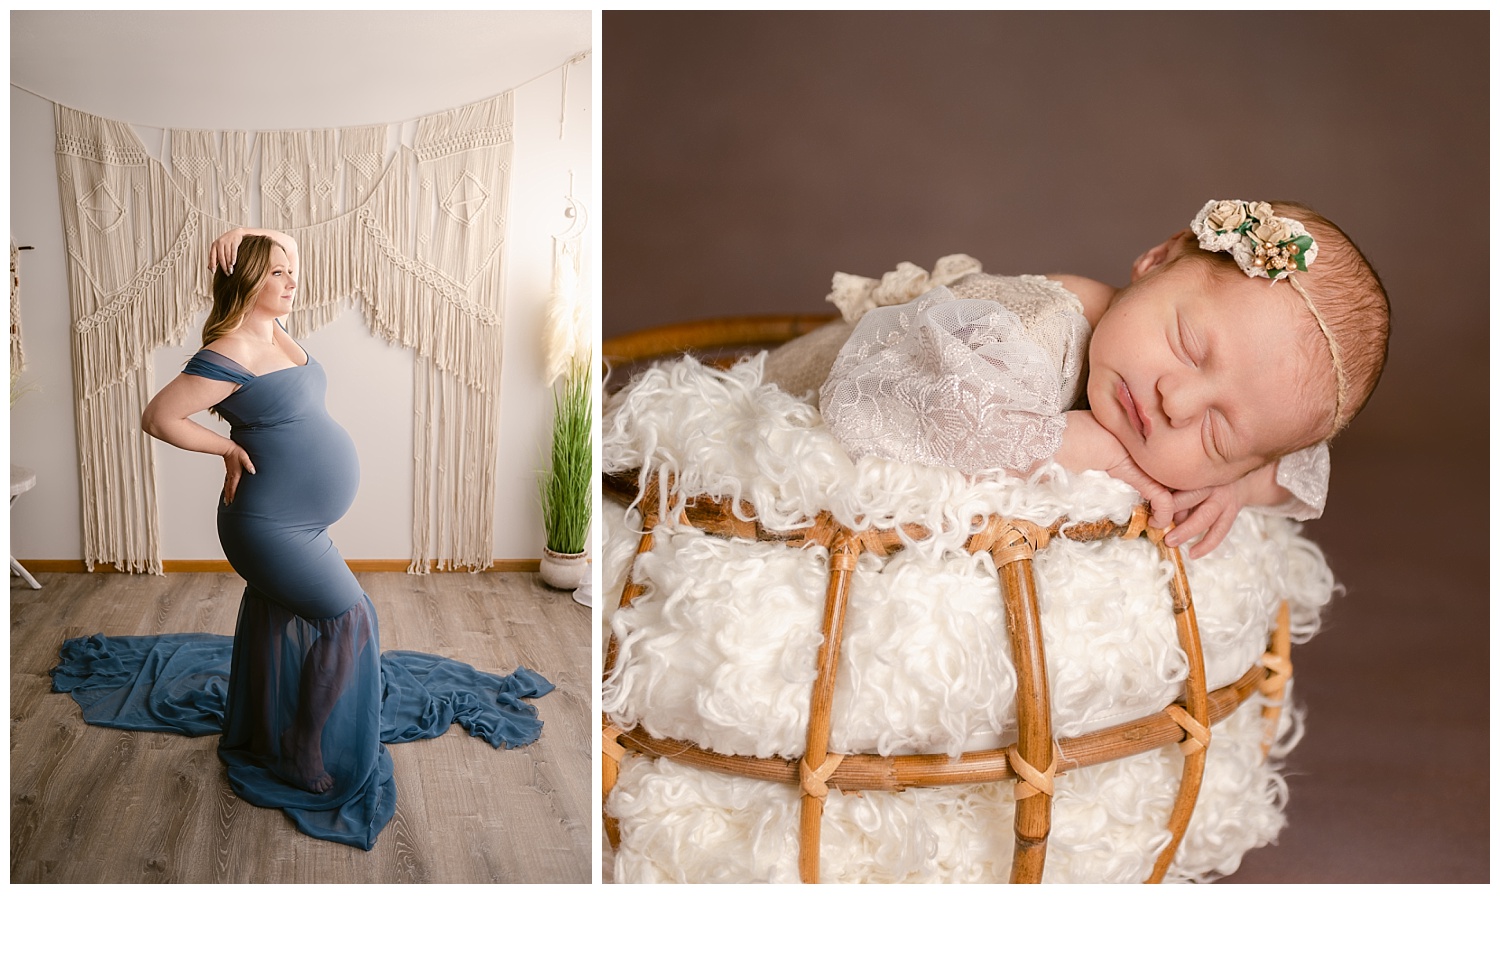 Save $100 when you book Maternity and Newborn Photography at the same time. Central Minnesota